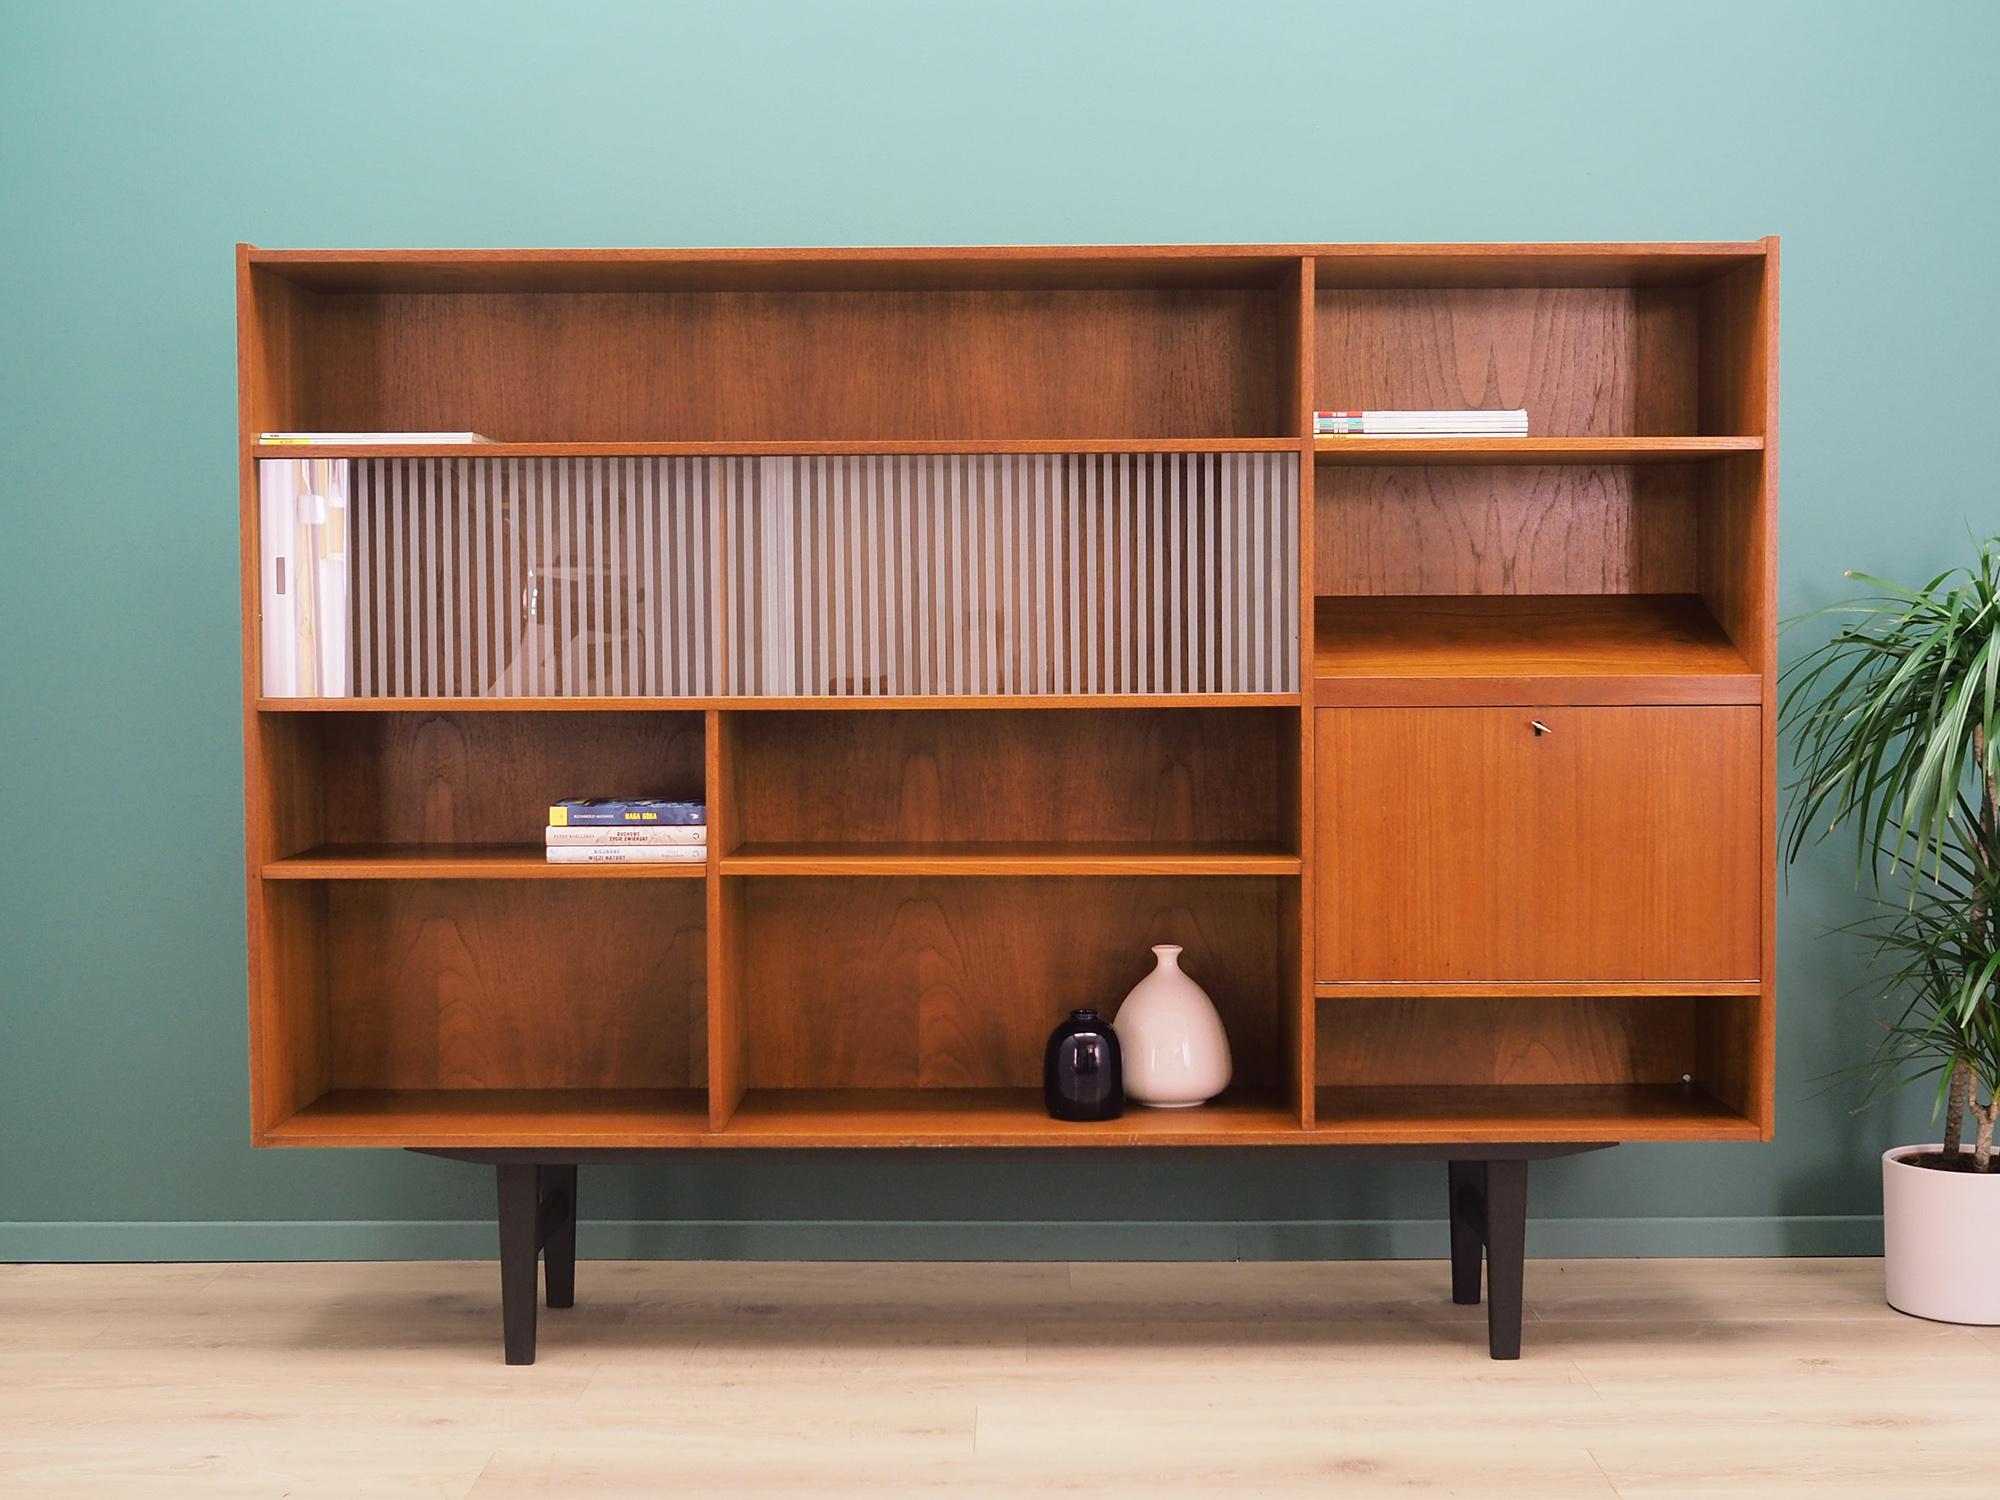 Bookcase was made in the 1970s, Danish production.

The structure is covered with teak veneer. Legs made of solid wood stained black. Surface after refreshing. Inside the space has been filled with practical shelves. The shelves are not adjustable